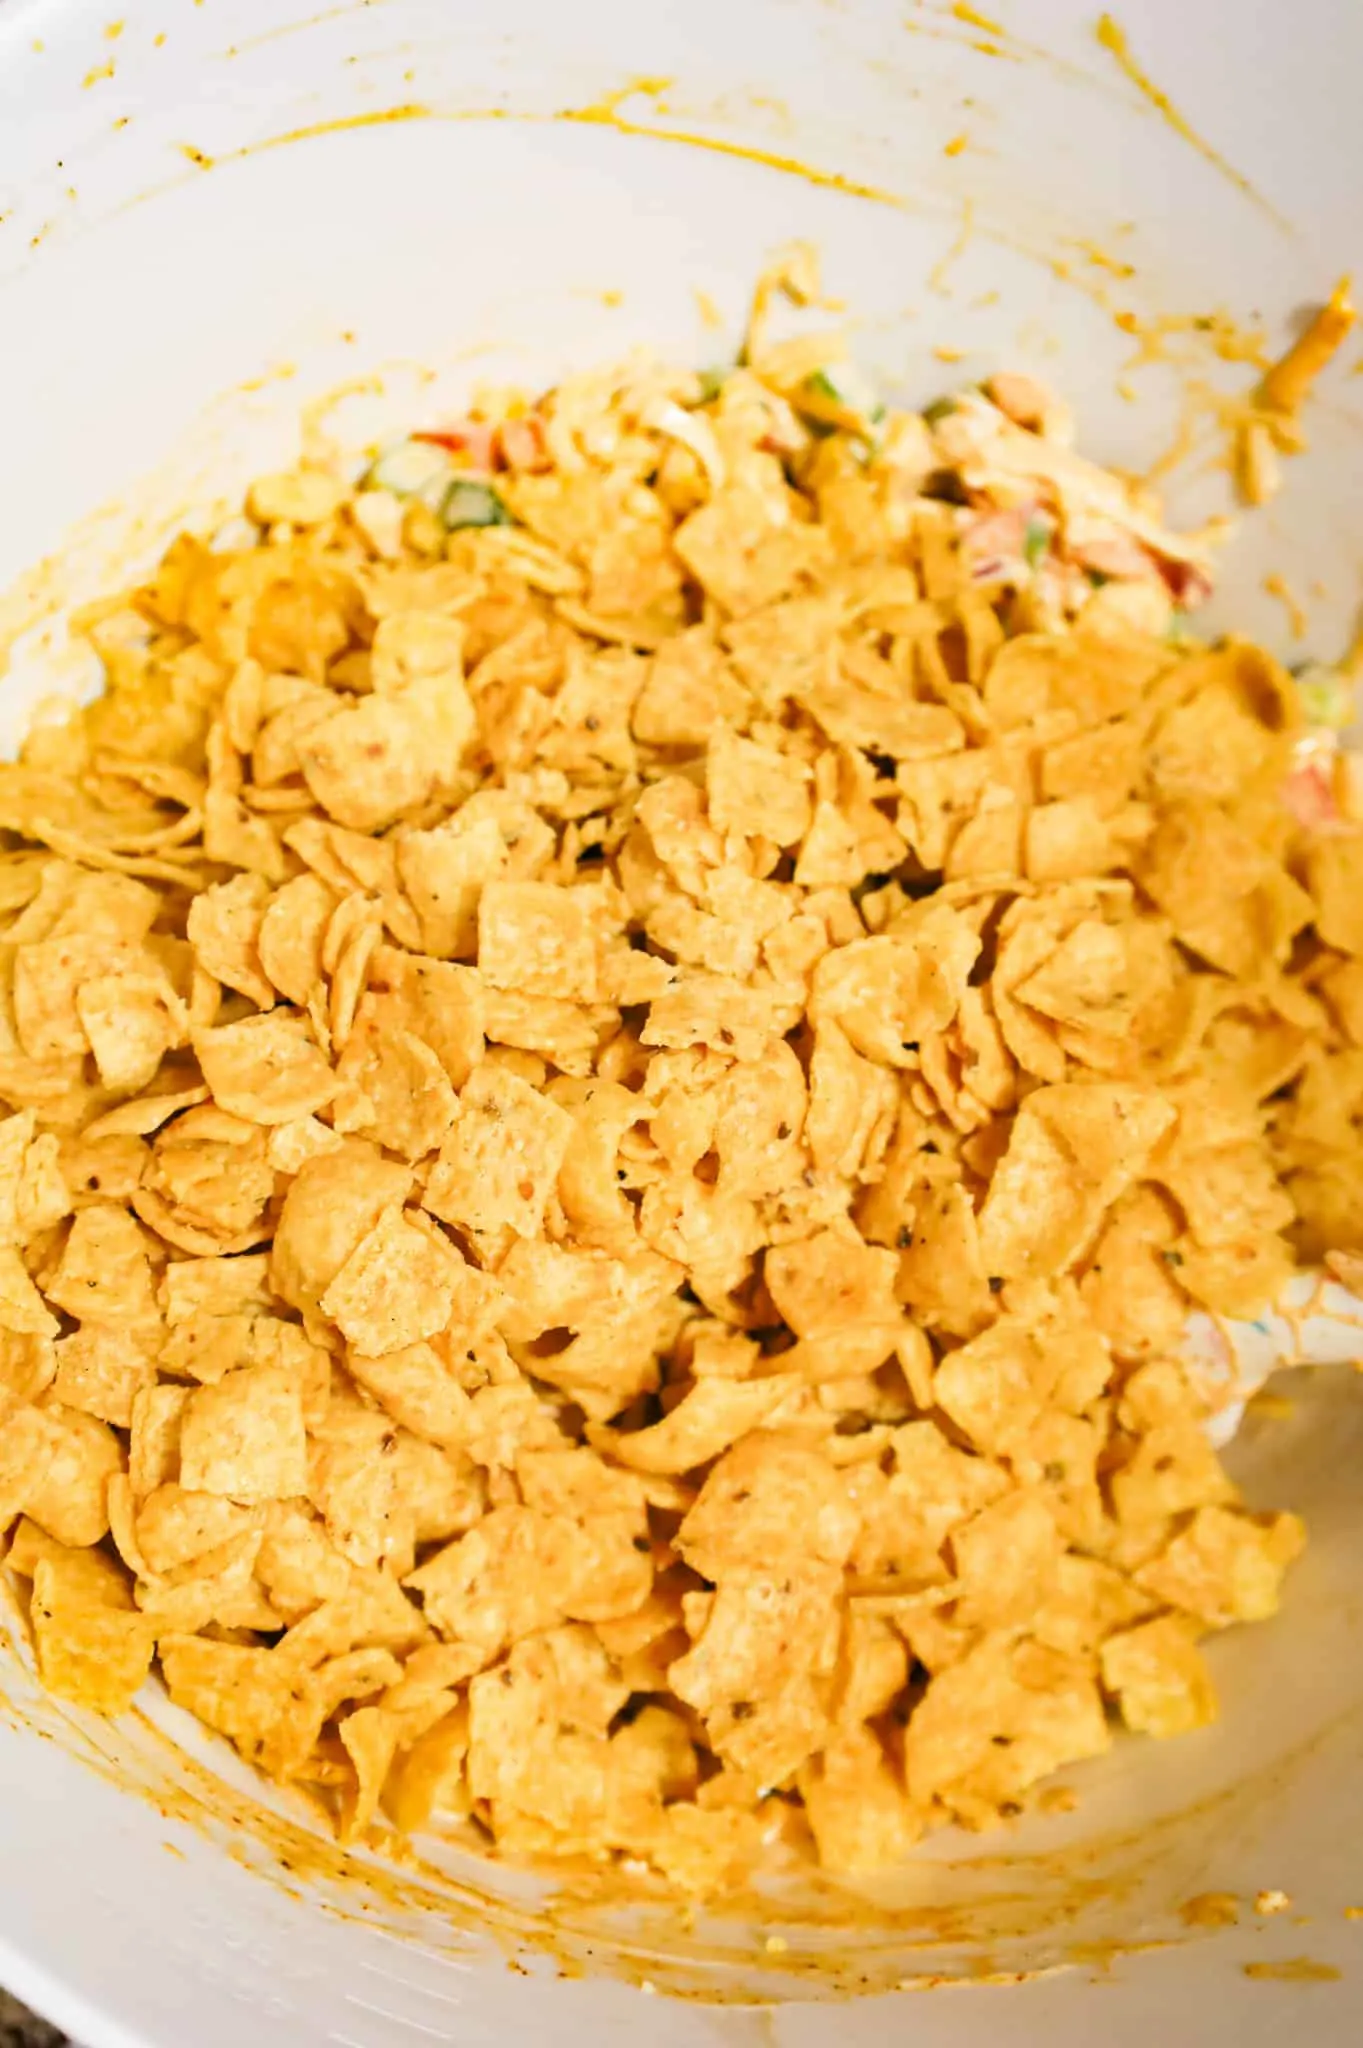 crumbled corn chips on top of cheesy corn salad mixture in a mixing bowl